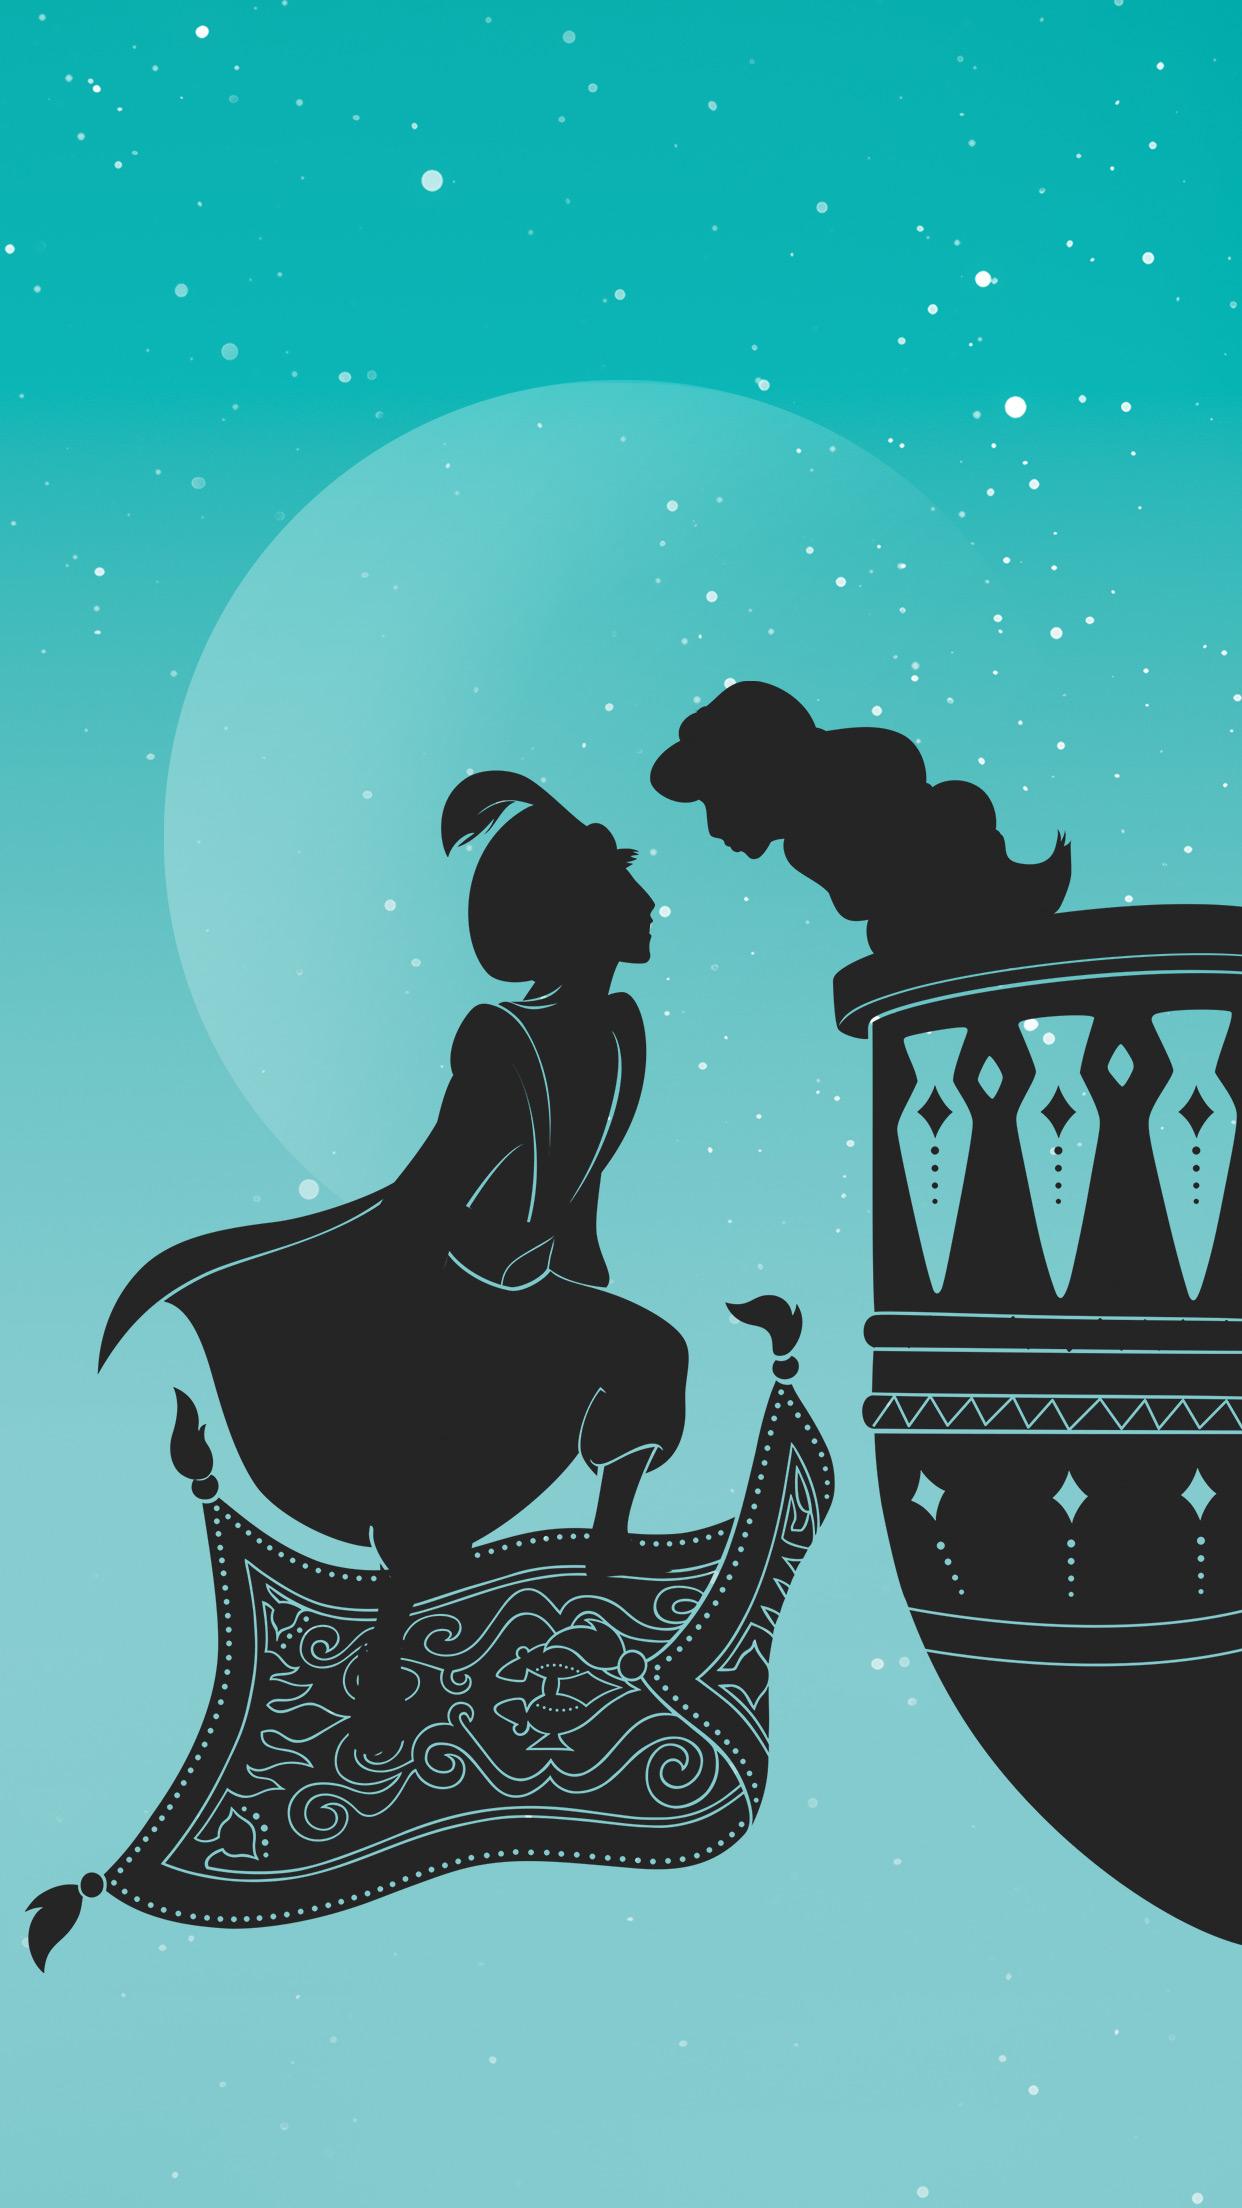 These Papercut Inspired Disney Princess Phone Wallpaper Are So